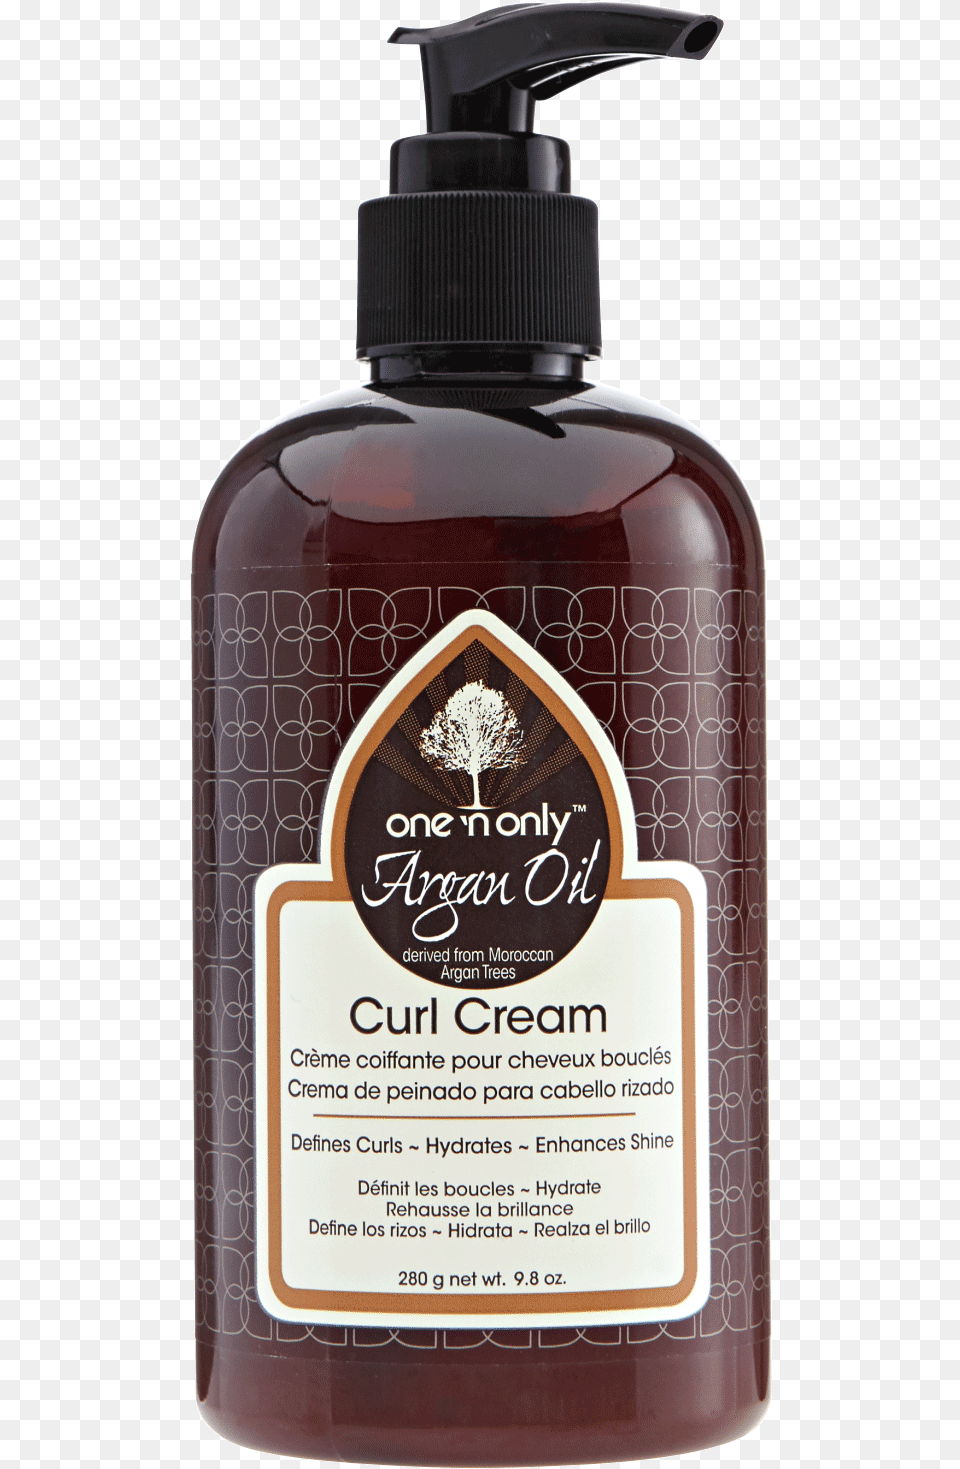 Mens Hair Salon With One N Only Argan Oil Curl Cream One And Only Argan Oil, Bottle, Lotion, Cosmetics, Perfume Png